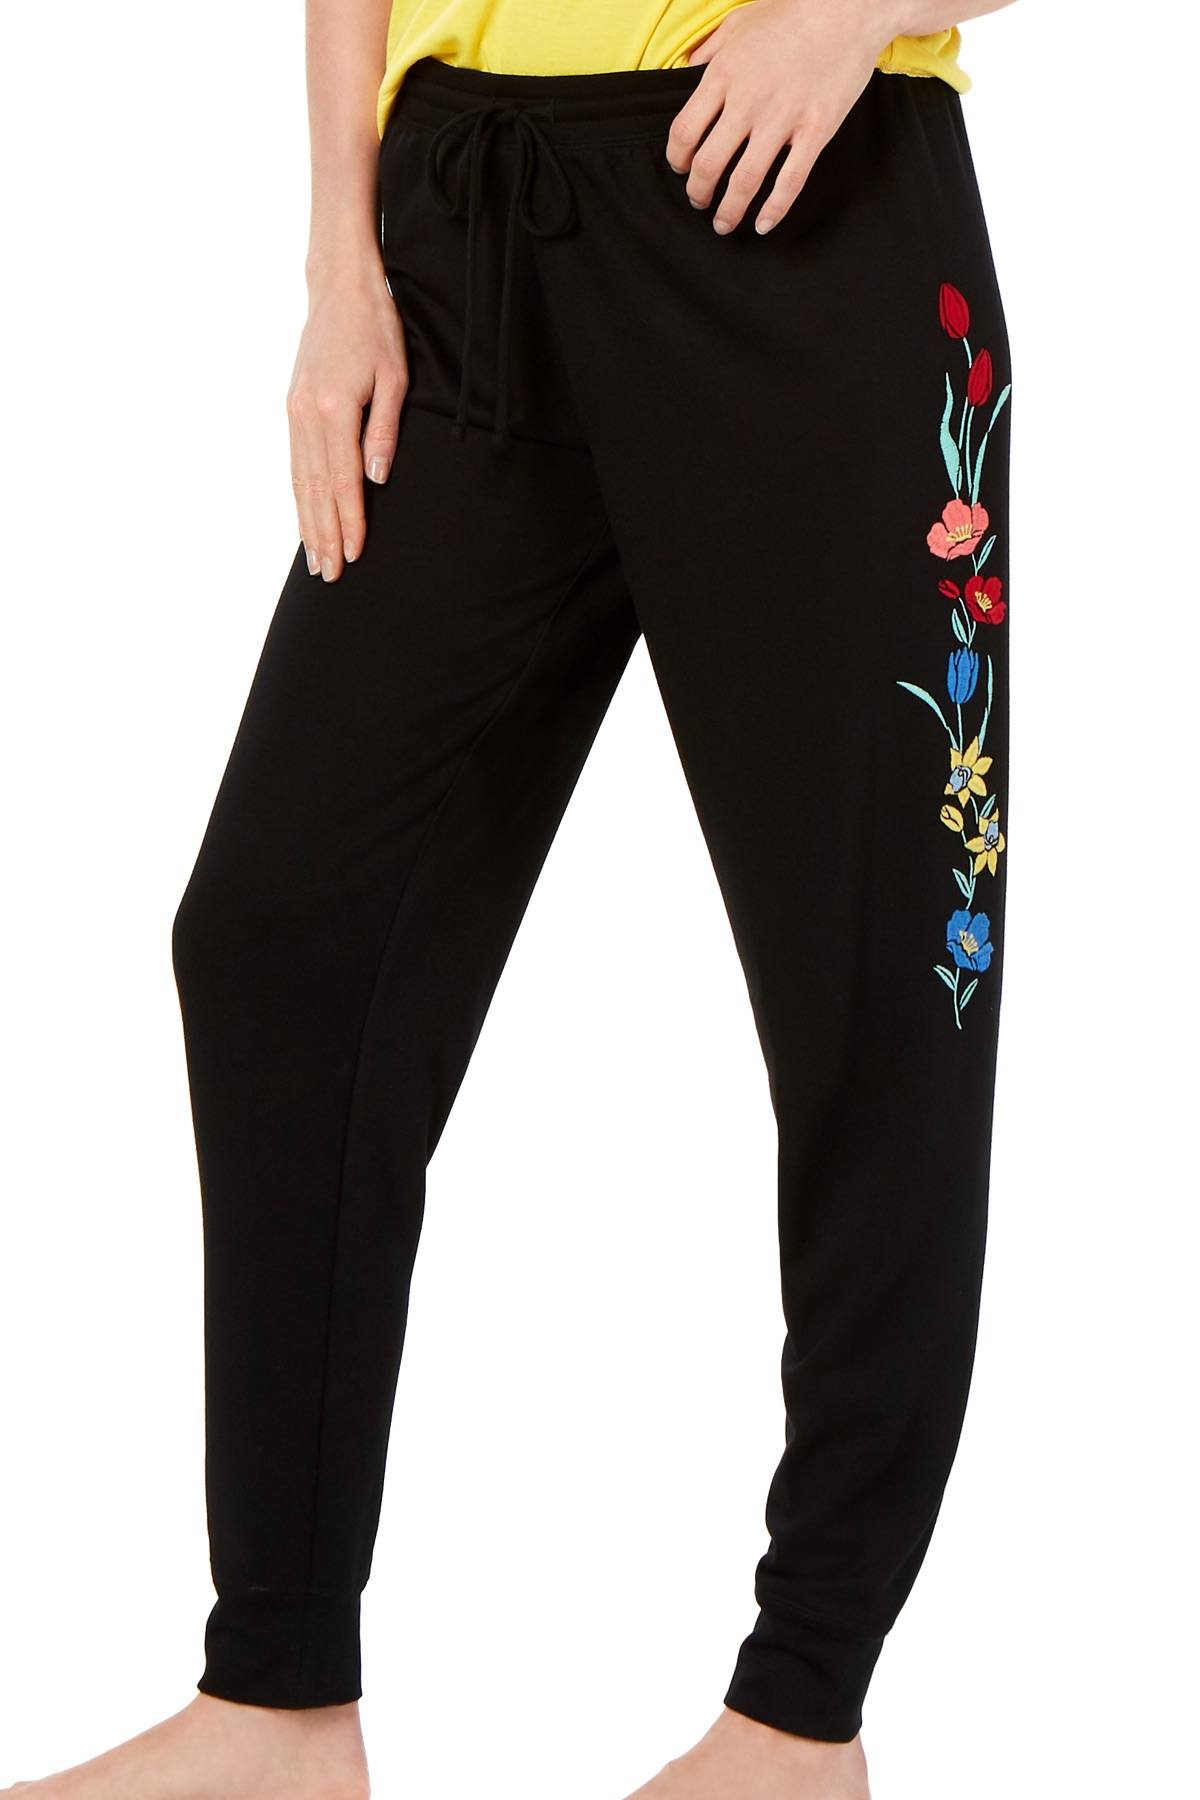 Jenni  Jogger Lounge Pant in Wildflower Embroidered Black